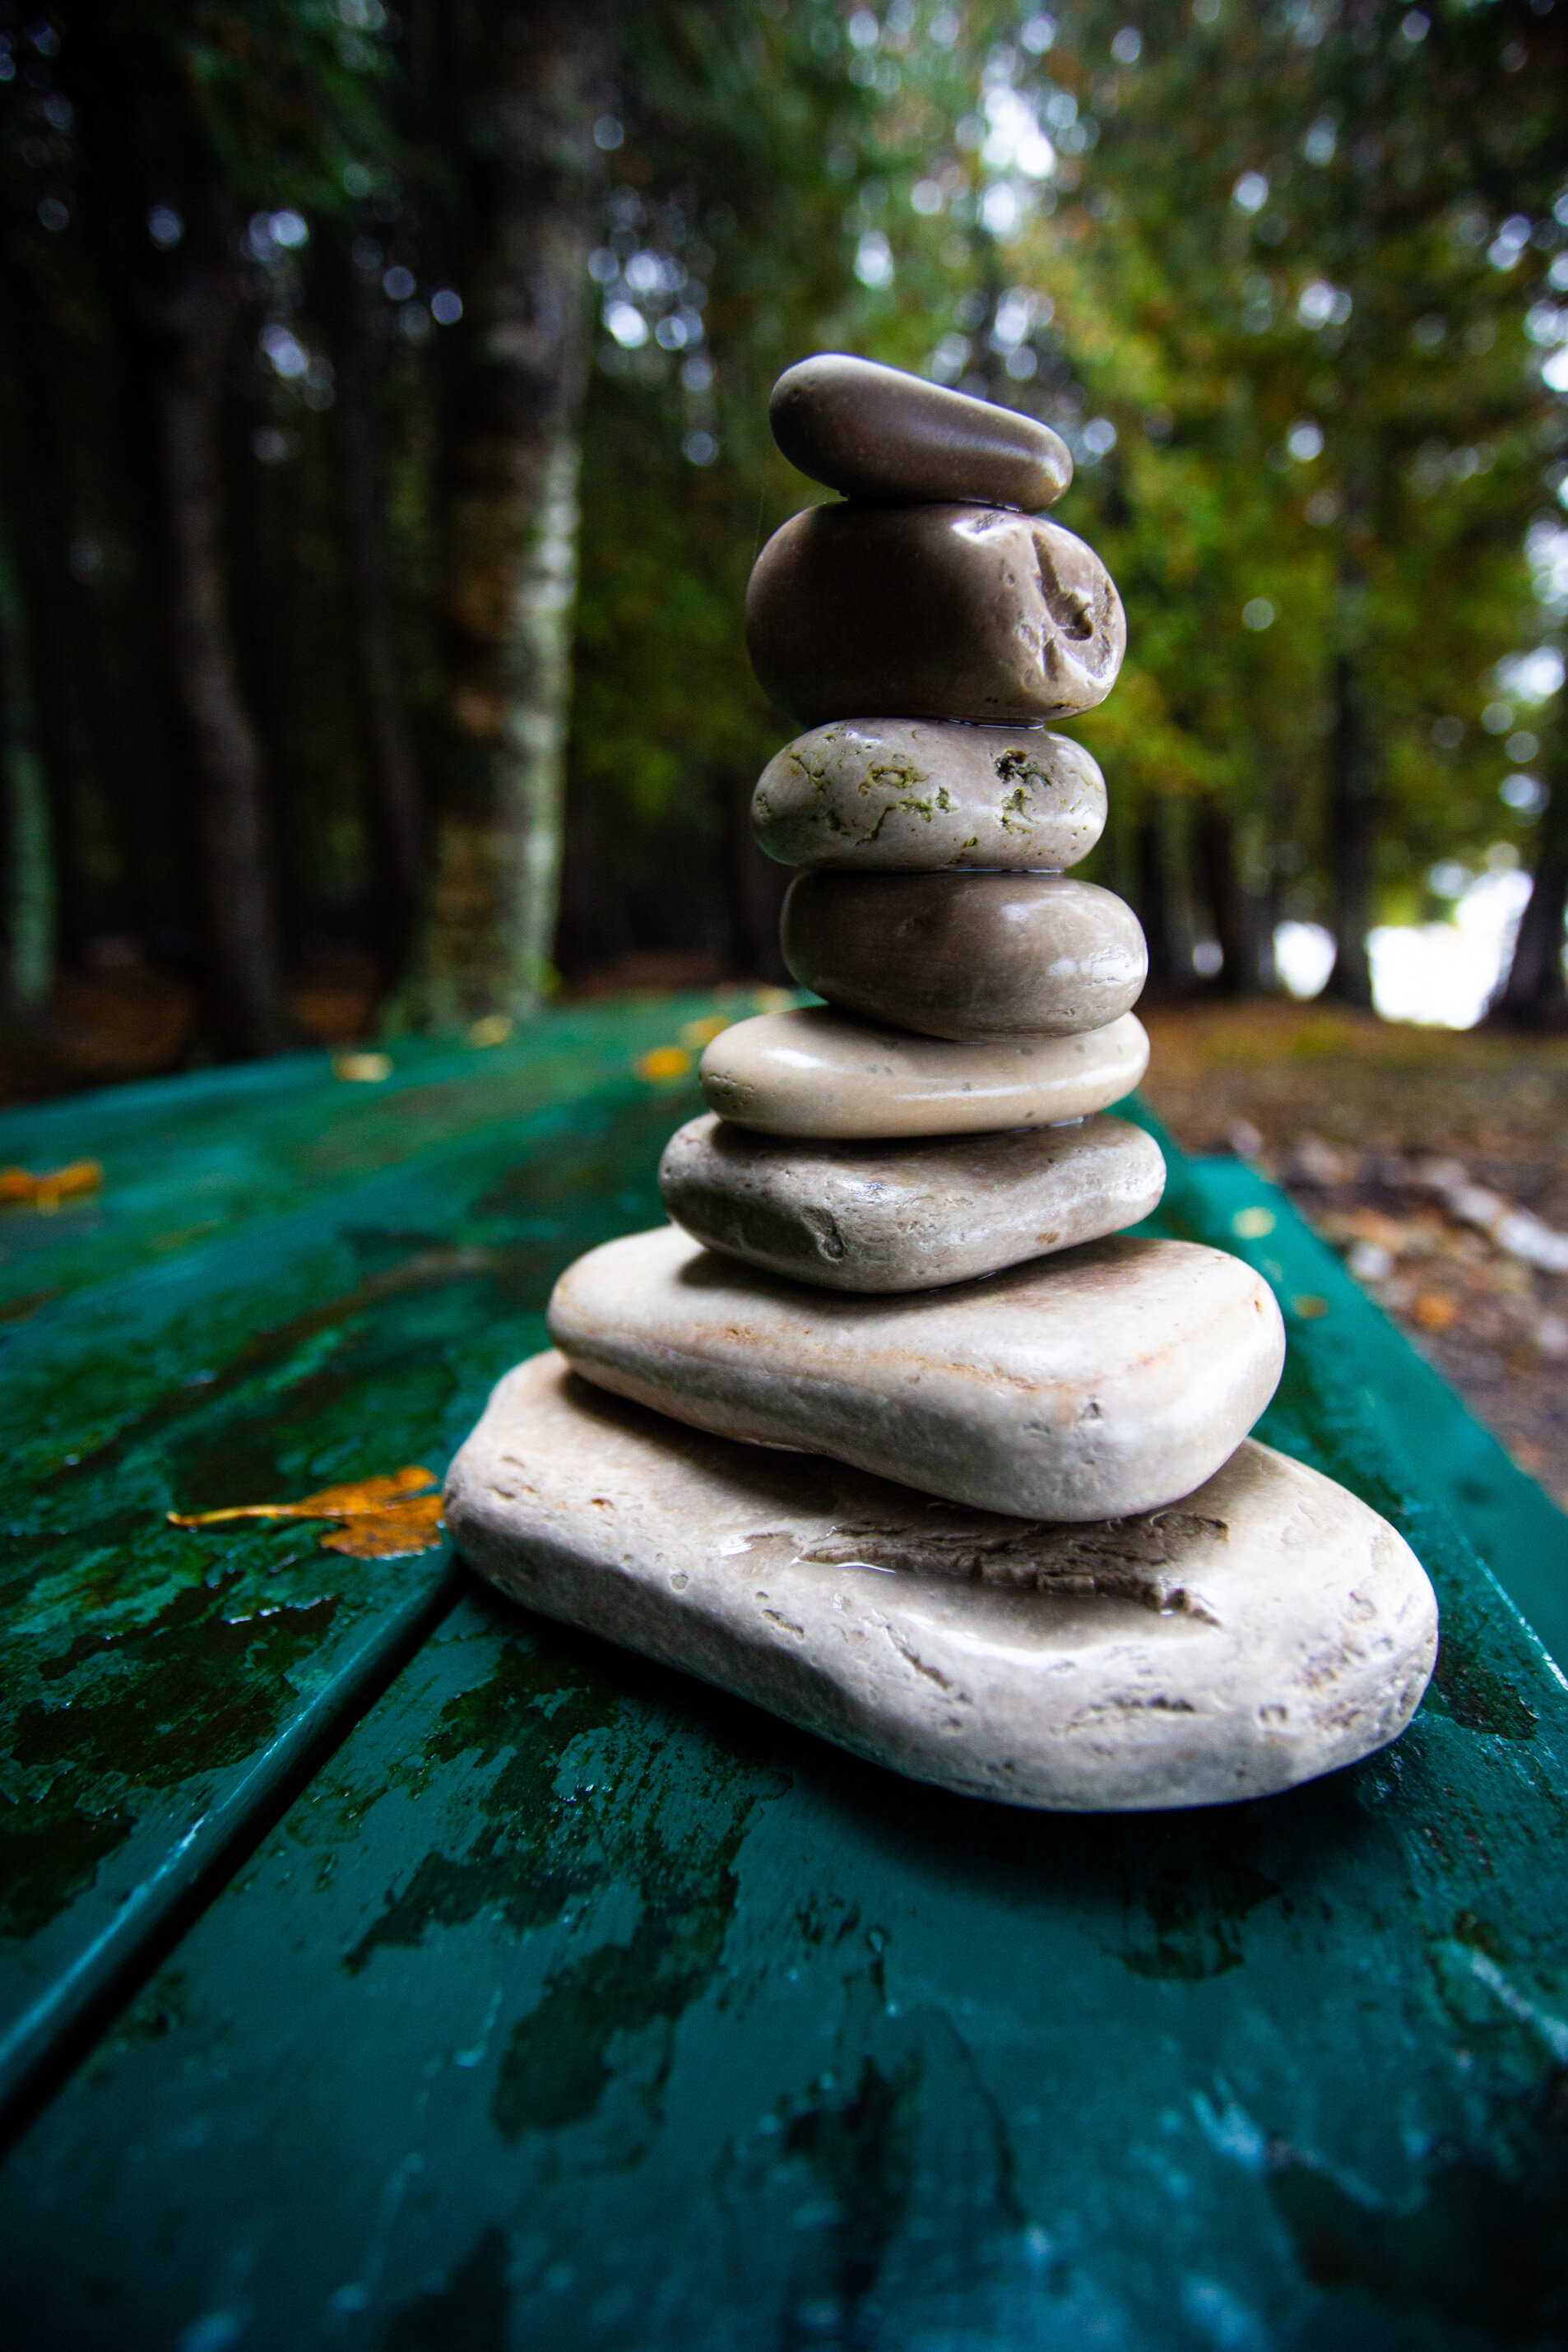 smooth stones stacked on a green table in forest